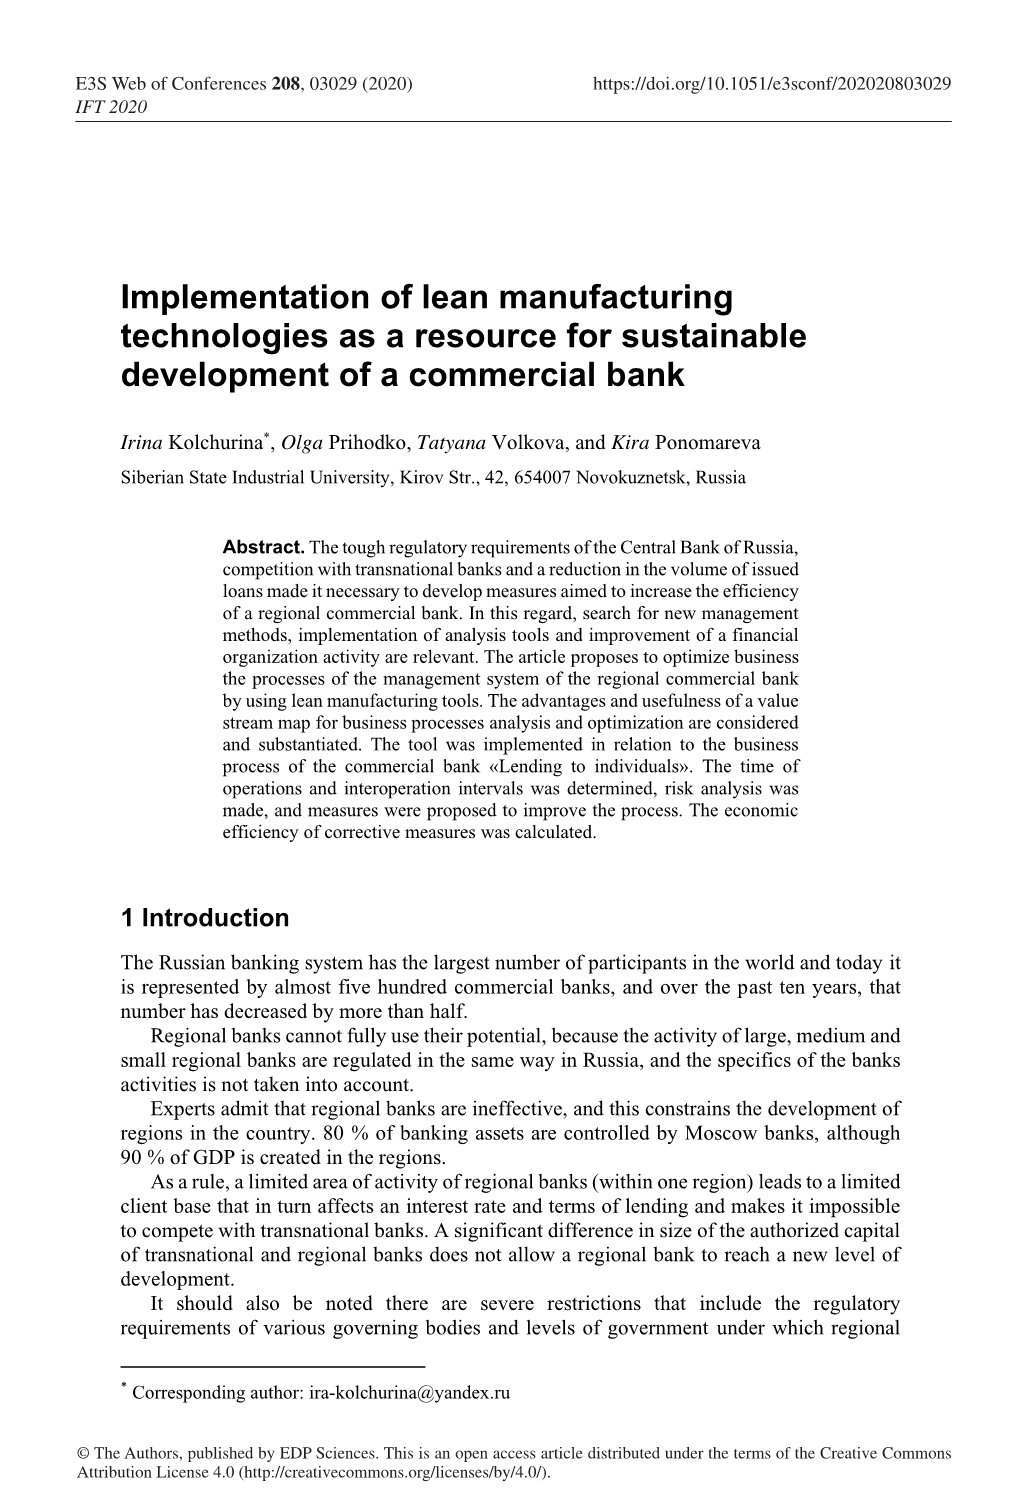 Implementation of Lean Manufacturing Technologies As a Resource for Sustainable Development of a Commercial Bank